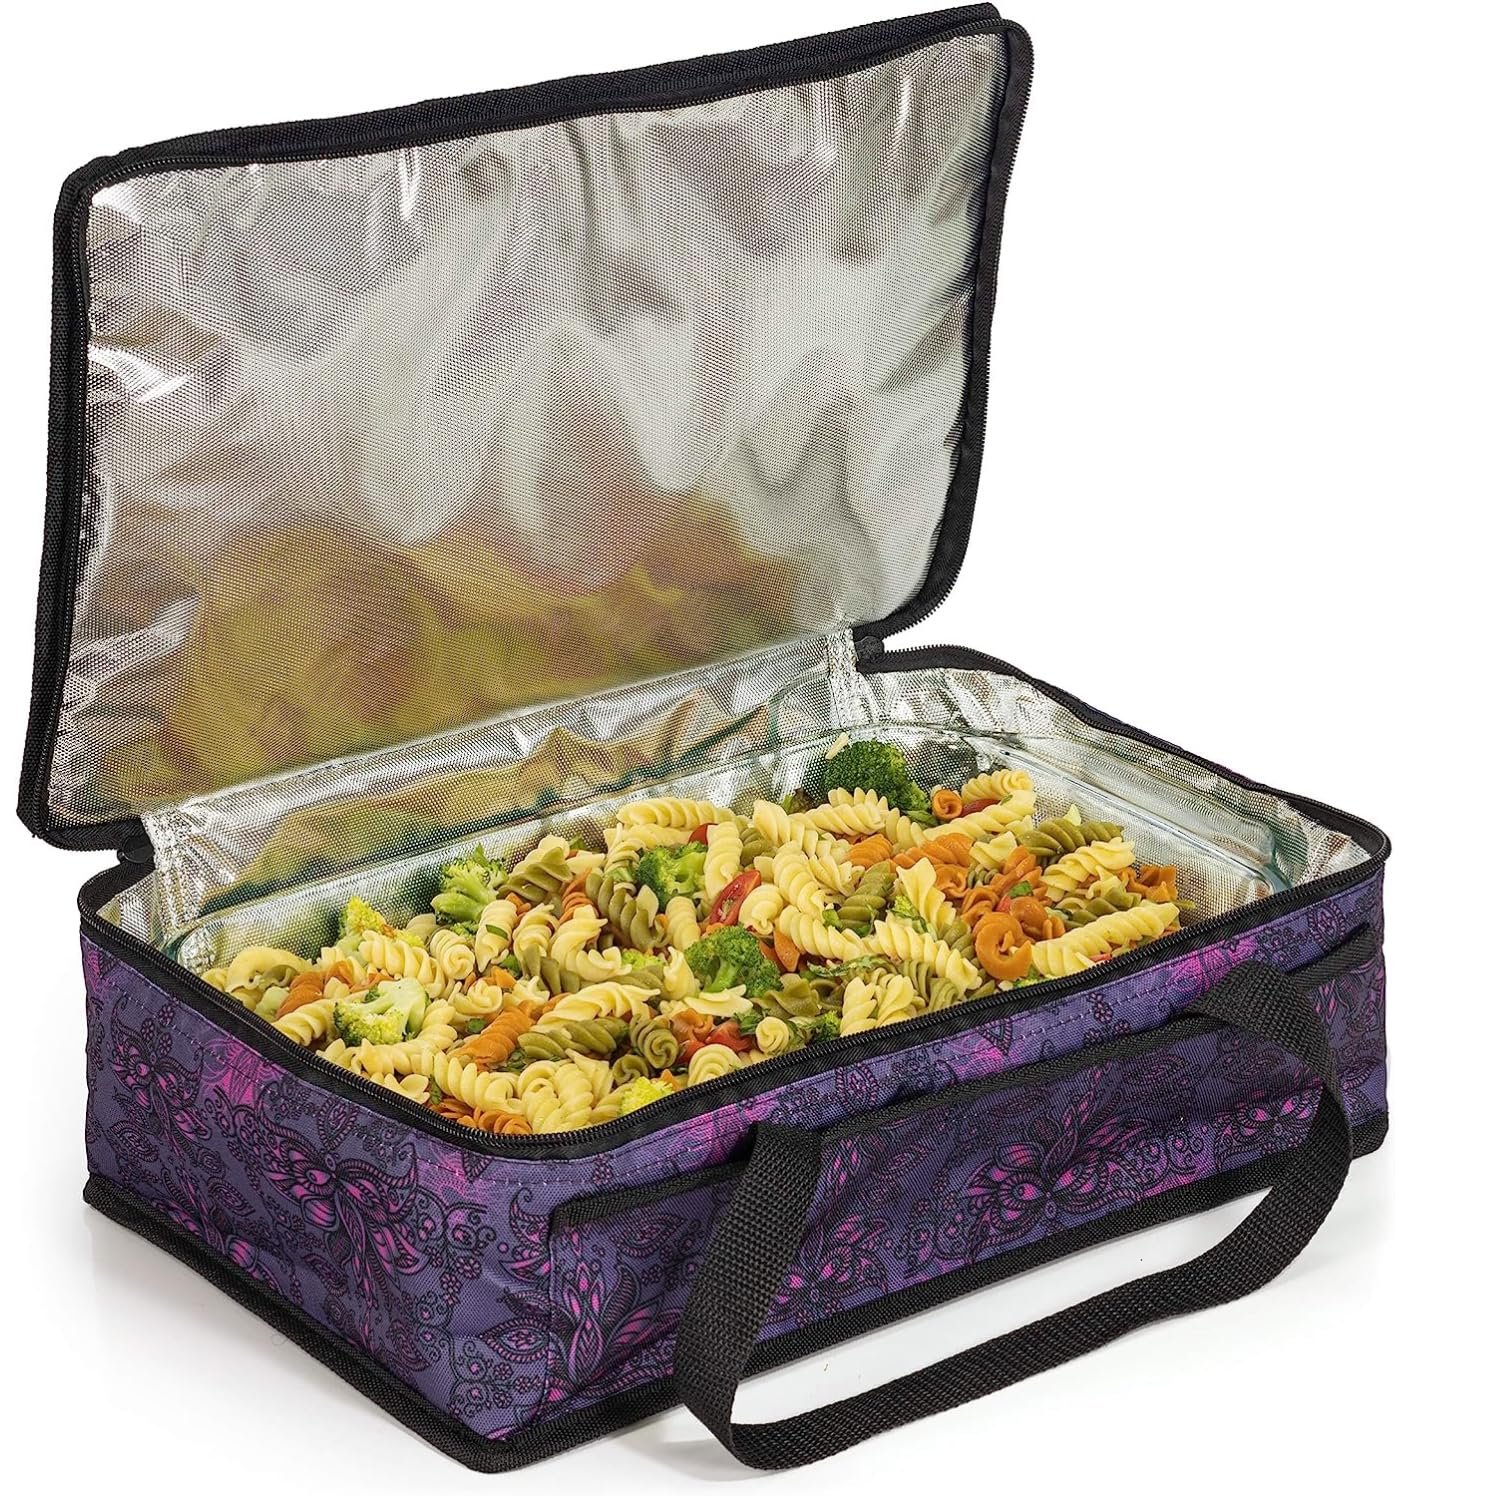 VP Home Insulated Casserole Carrier Travel Bag (Henna Tattoo) for Trip, Birthday Party, Mother's Day, Holiday, Christmas Day, Grocery Store, Supermarket, Outdoor Picnic etc